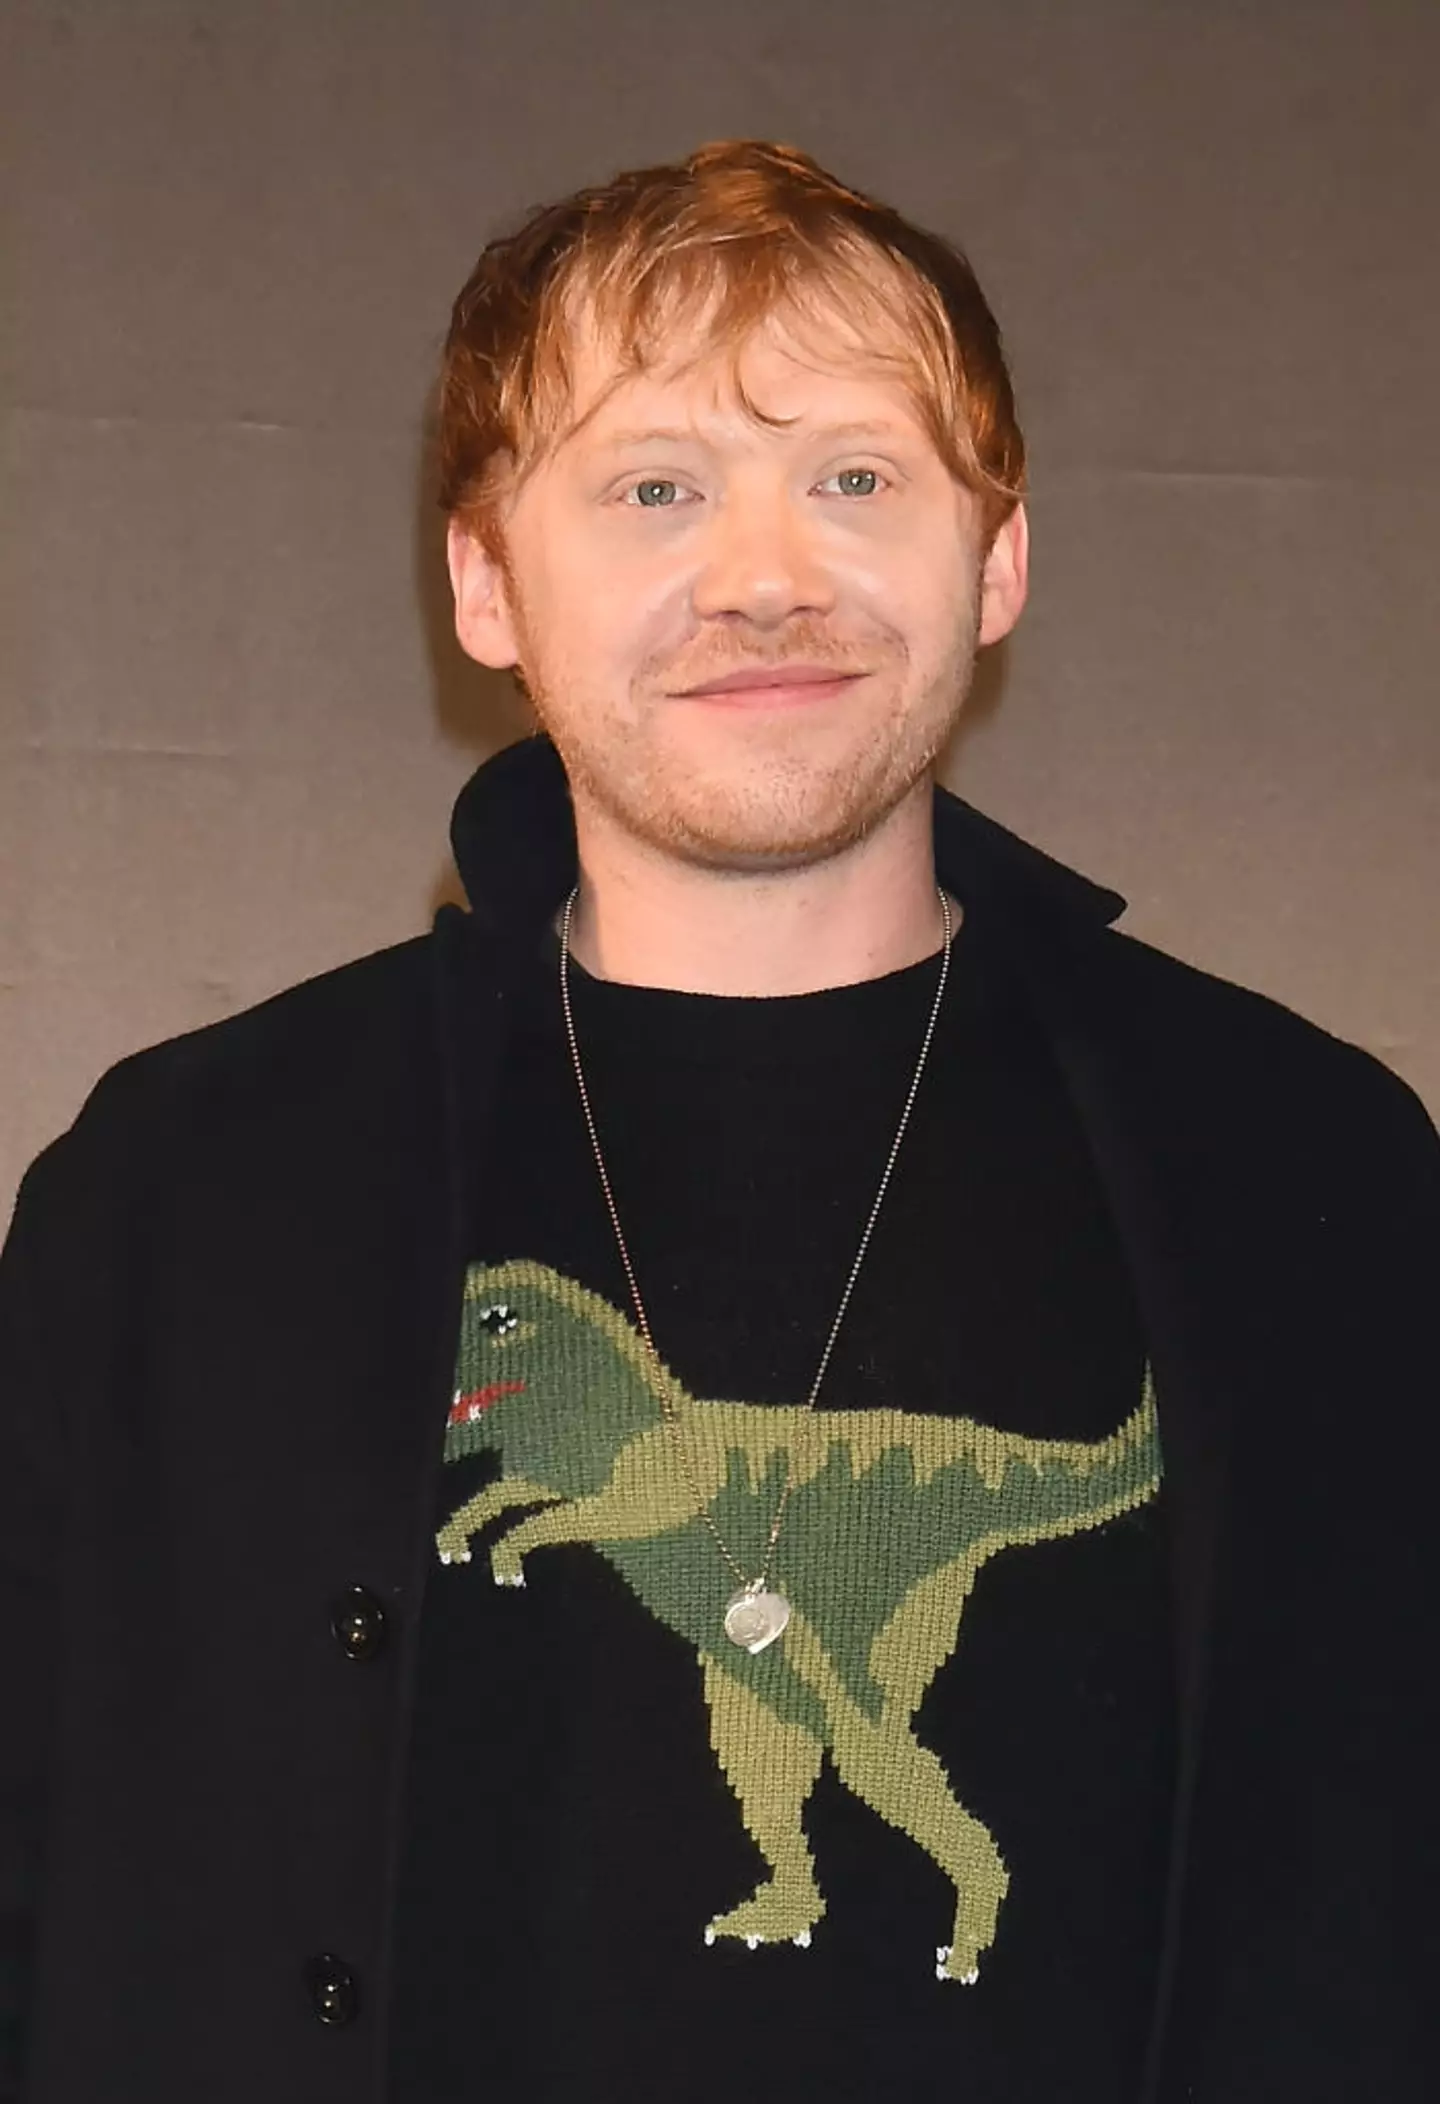 Rupert Grint expressed his support for the trans community. (Jun Sato/WireImage)